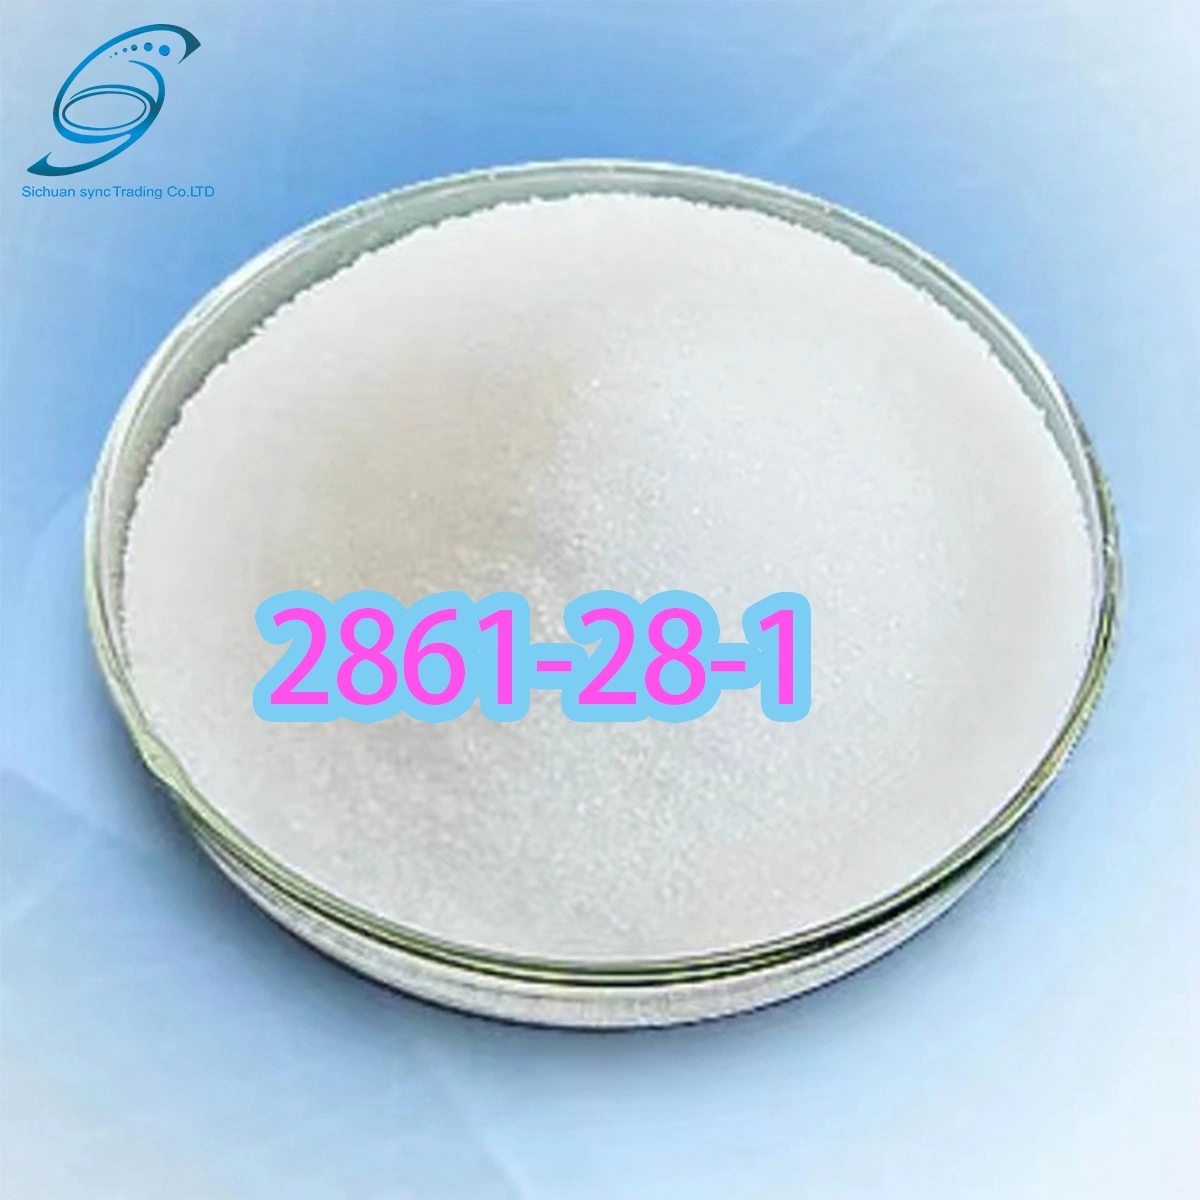 China Factory Supply (1, 3-BENZODIOXOL-5-YL) /CAS 2861-28-1/High Quality 2- (1, 3-benzodioxol-5-yl) Acetic Acid ODM Pharmaceutical Intermediate BMK Pmk